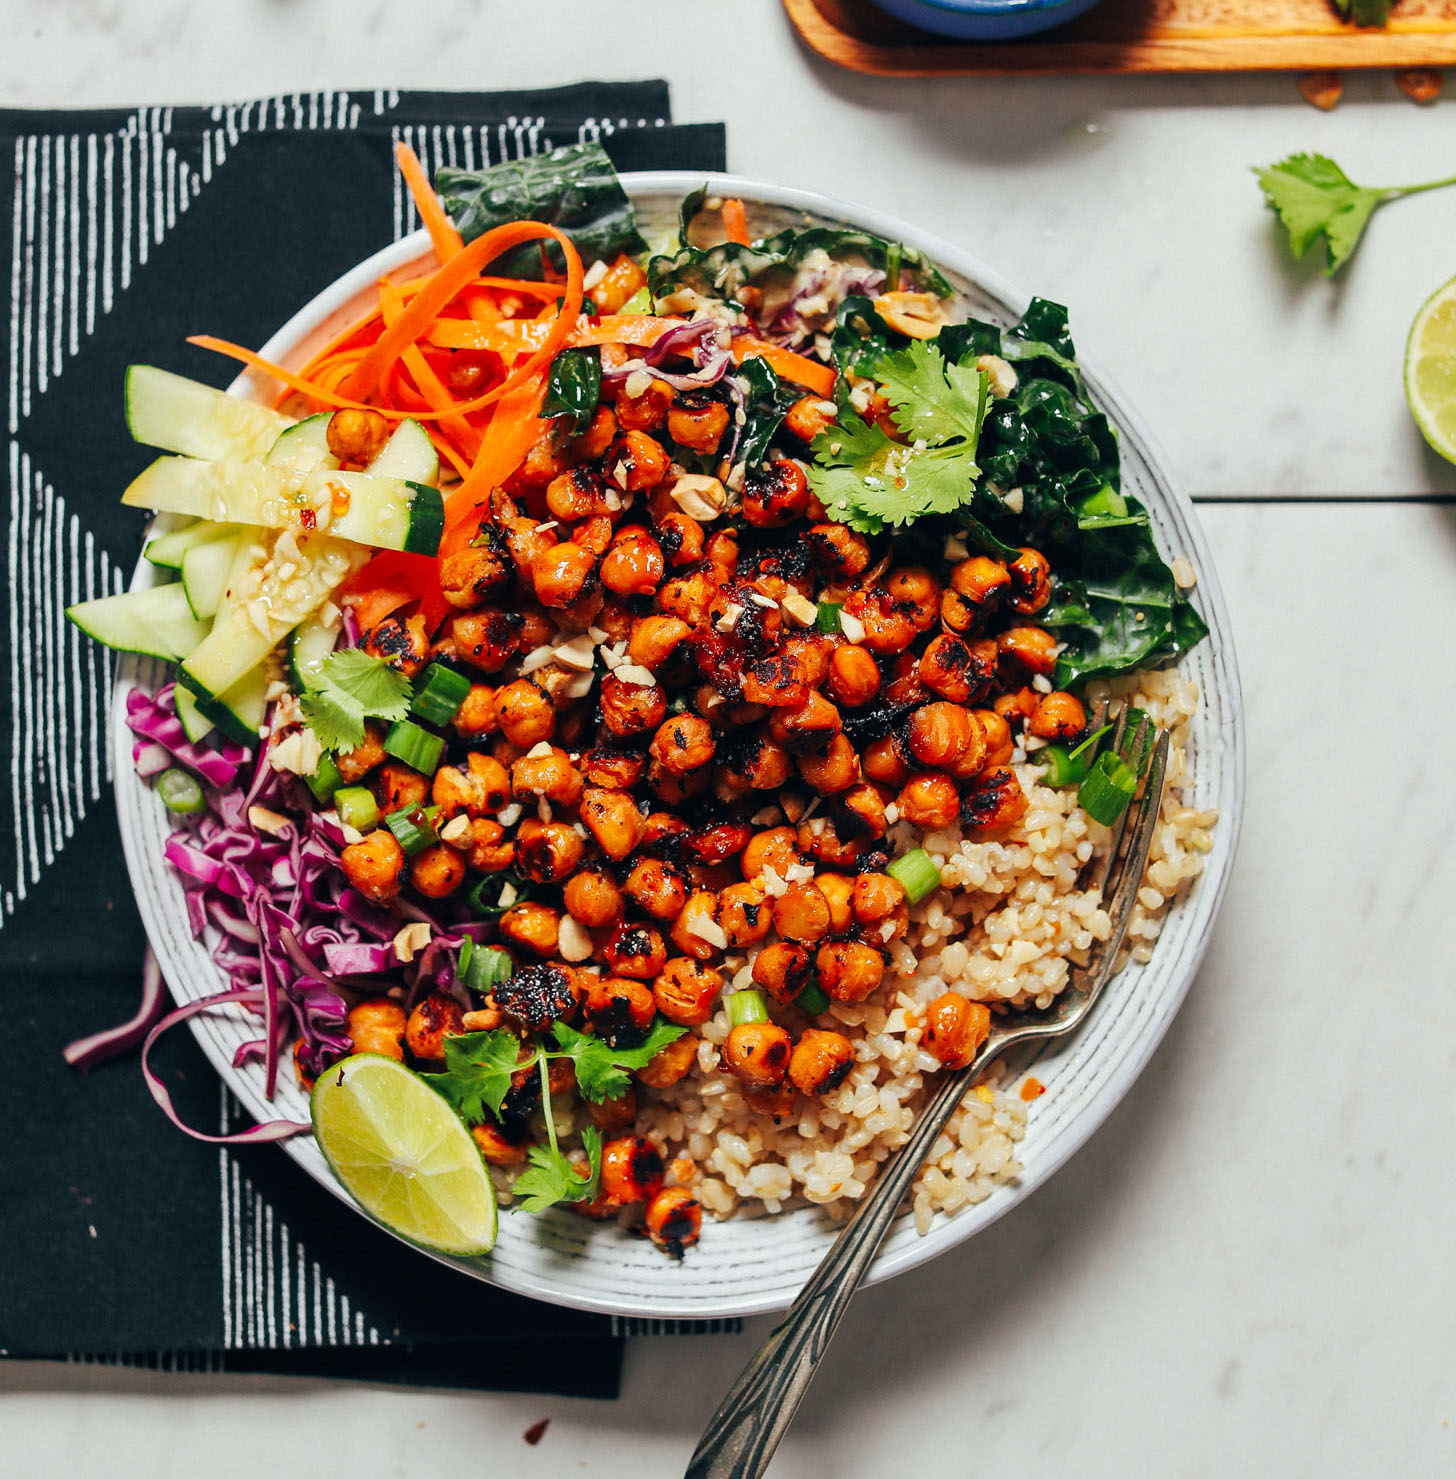 Gluten-Free vegan Crispy Miso Chickpea Bowl with fresh vegetables and brown rice